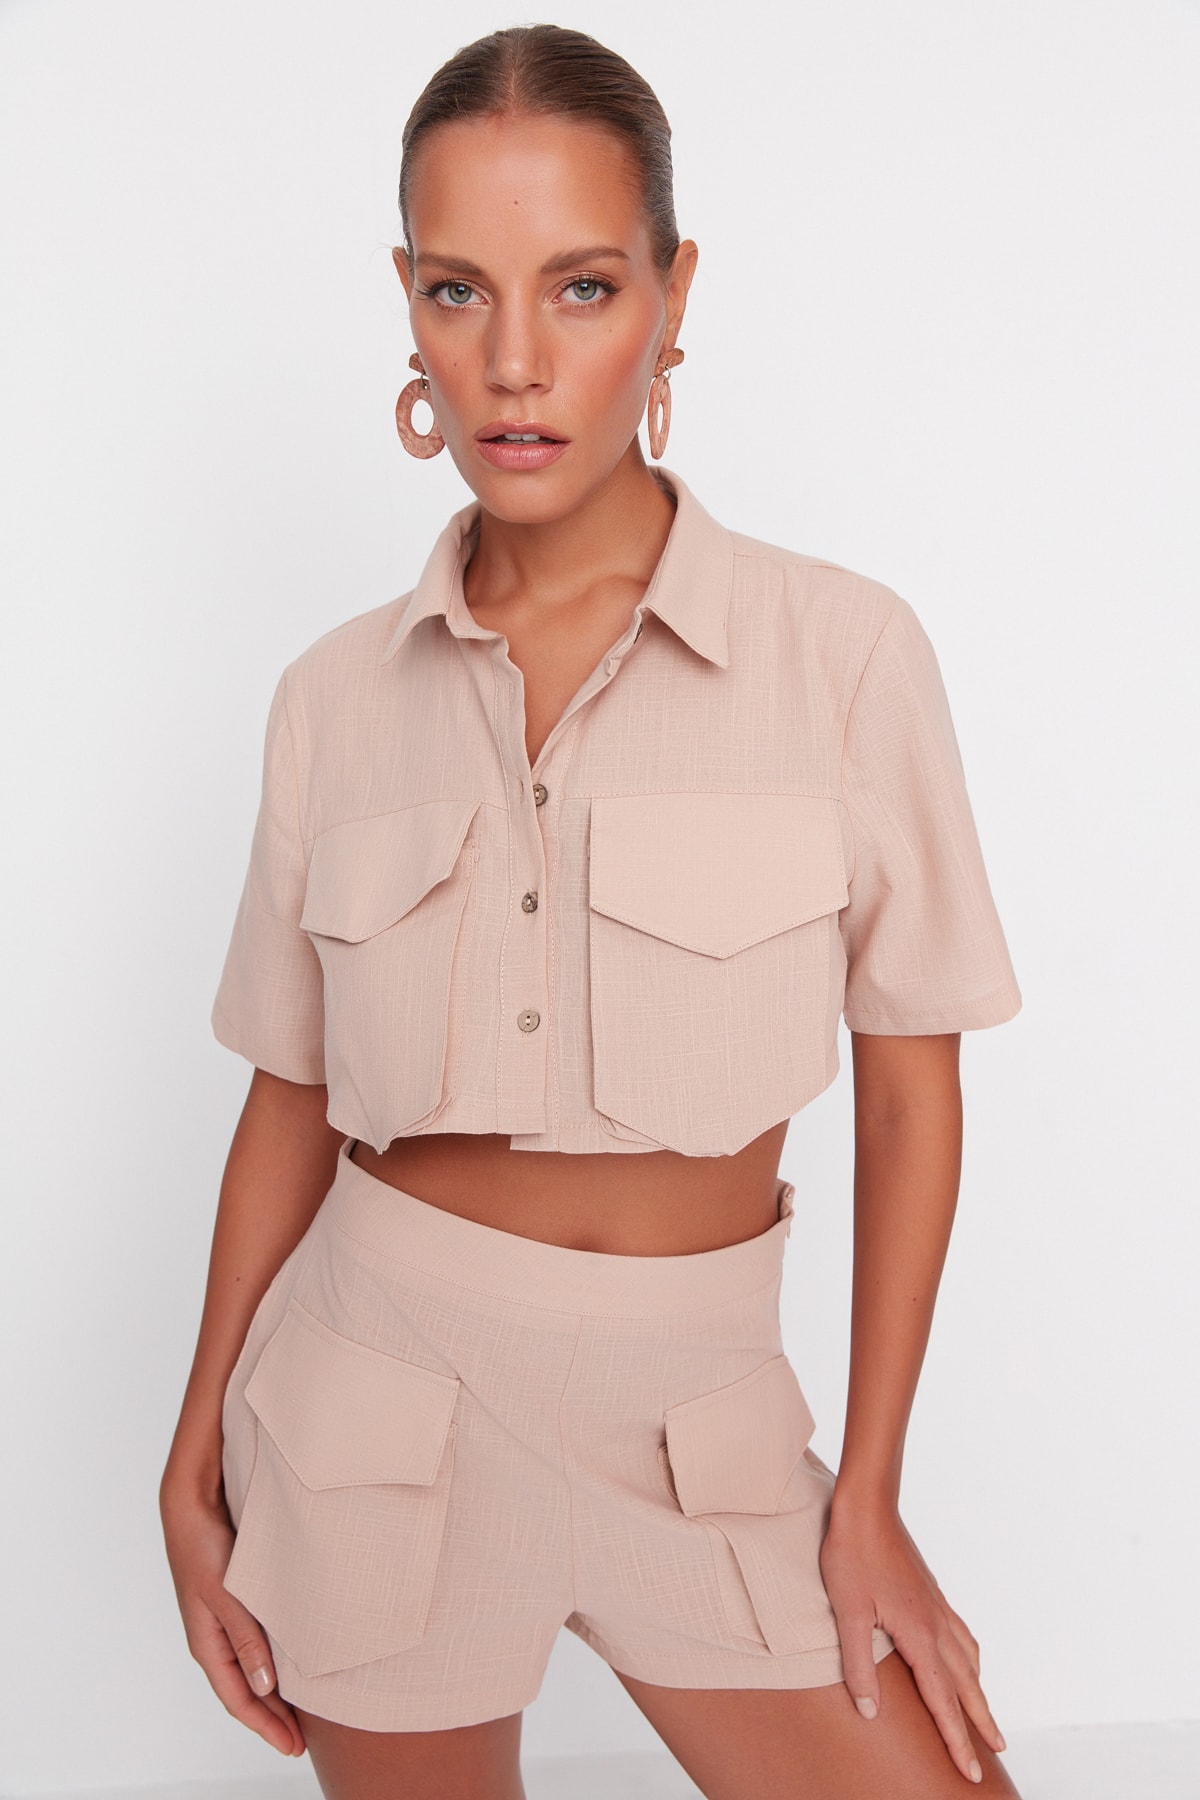 Trendyol Beige Woven 100% Cotton Shirt and Shorts Set With Pocket